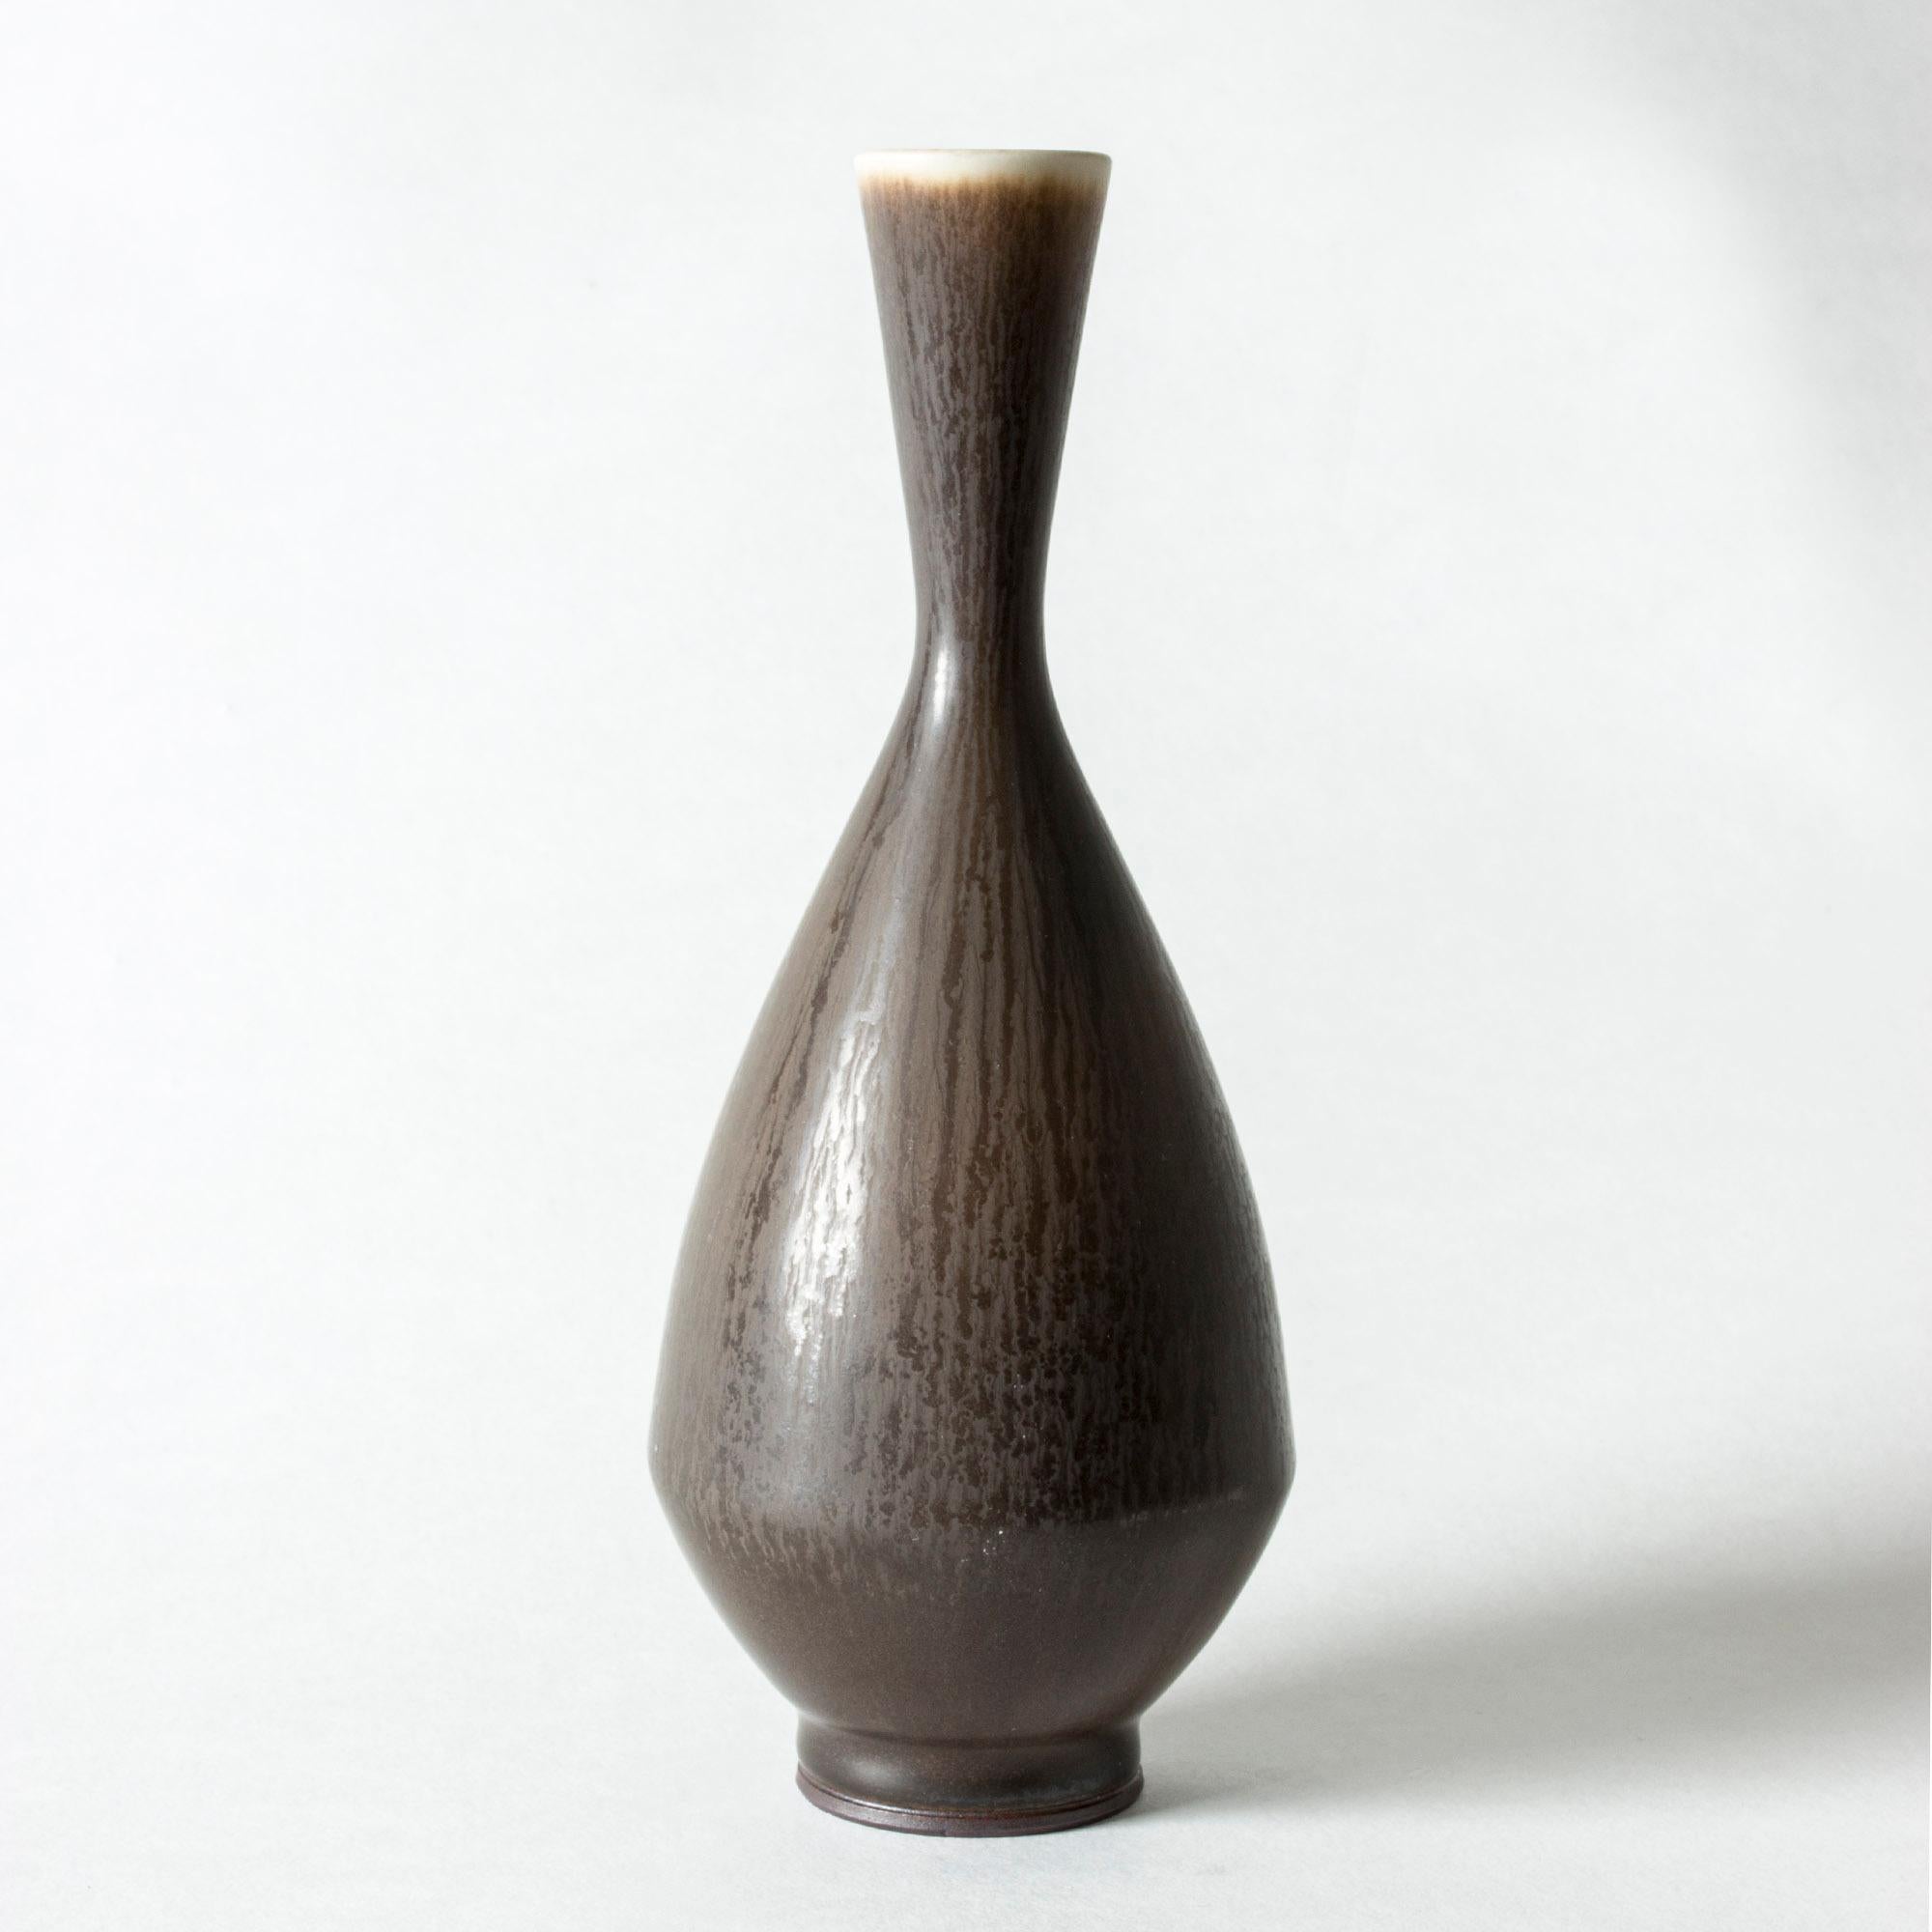 Lovely stoneware vase by Berndt Friberg, in a neat size. Slender neck and mouth with lighter glaze. Beautiful brown hare’s fur glaze with a bit of a grainy look.